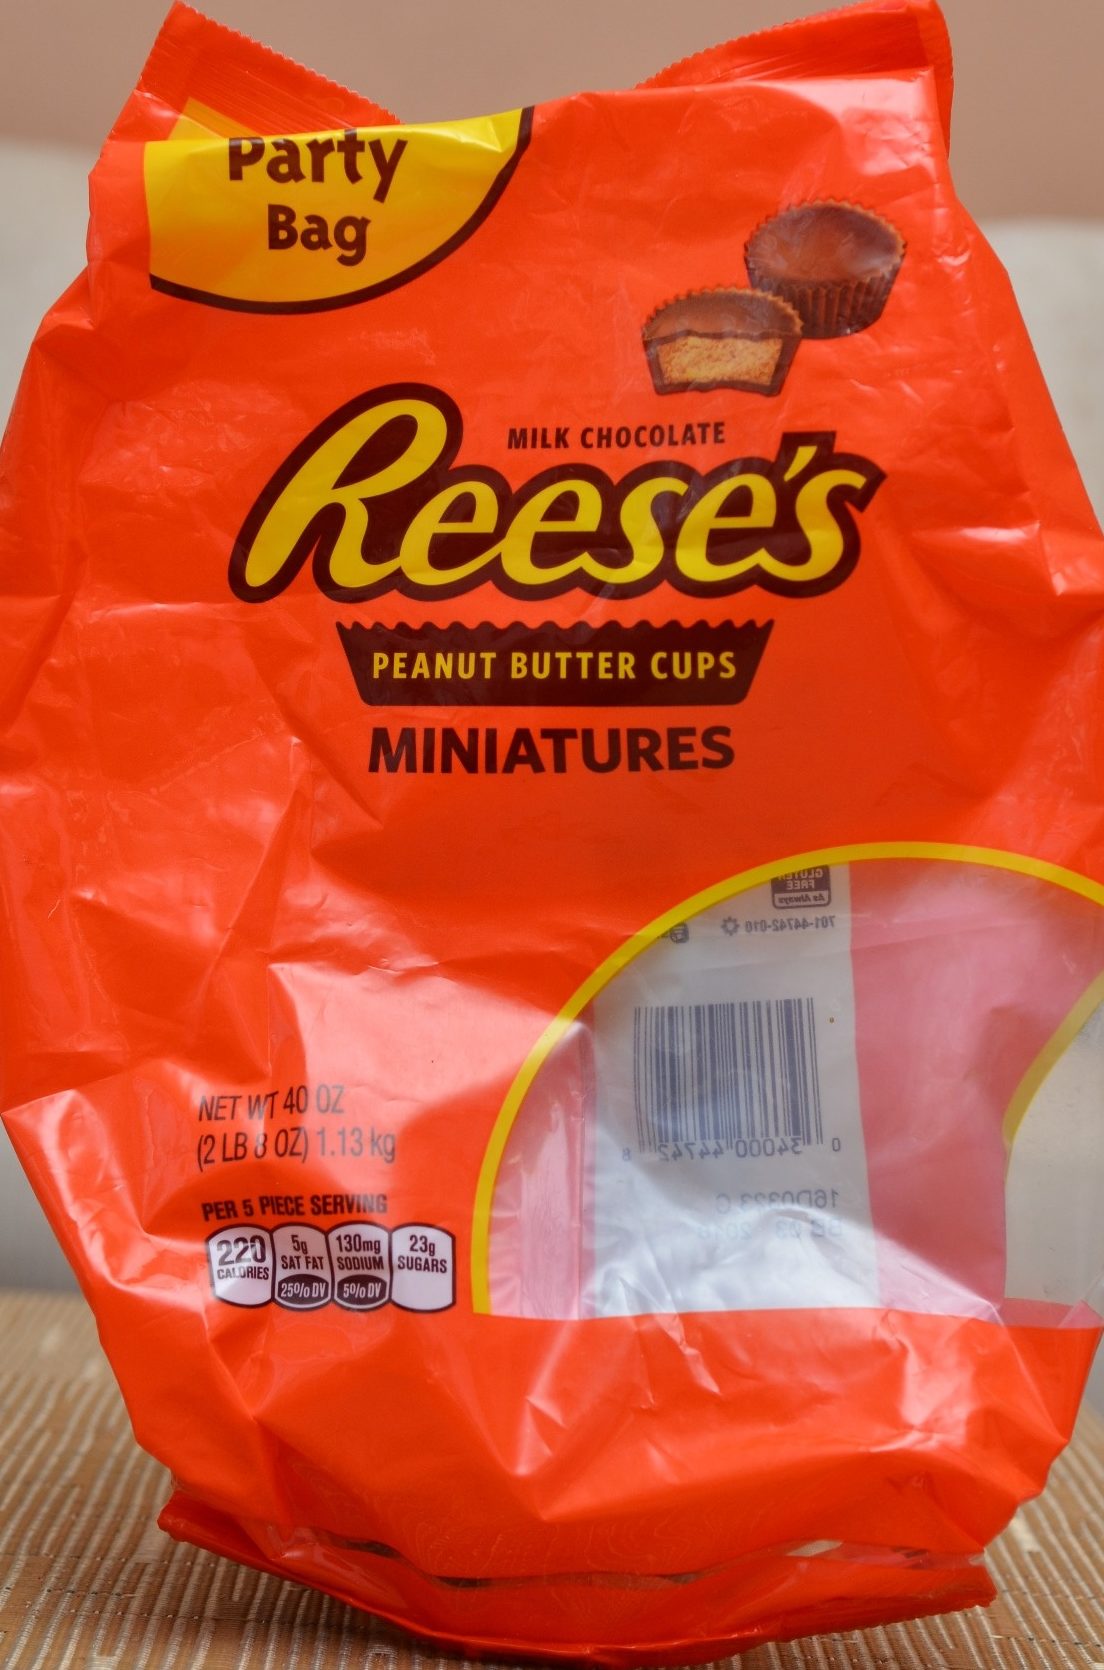 How many reese miniatures are in a 40 oz bag Milk Chocolate Miniatures Peanut Butter Cups Hershey S 40 Oz 1 13 Kg